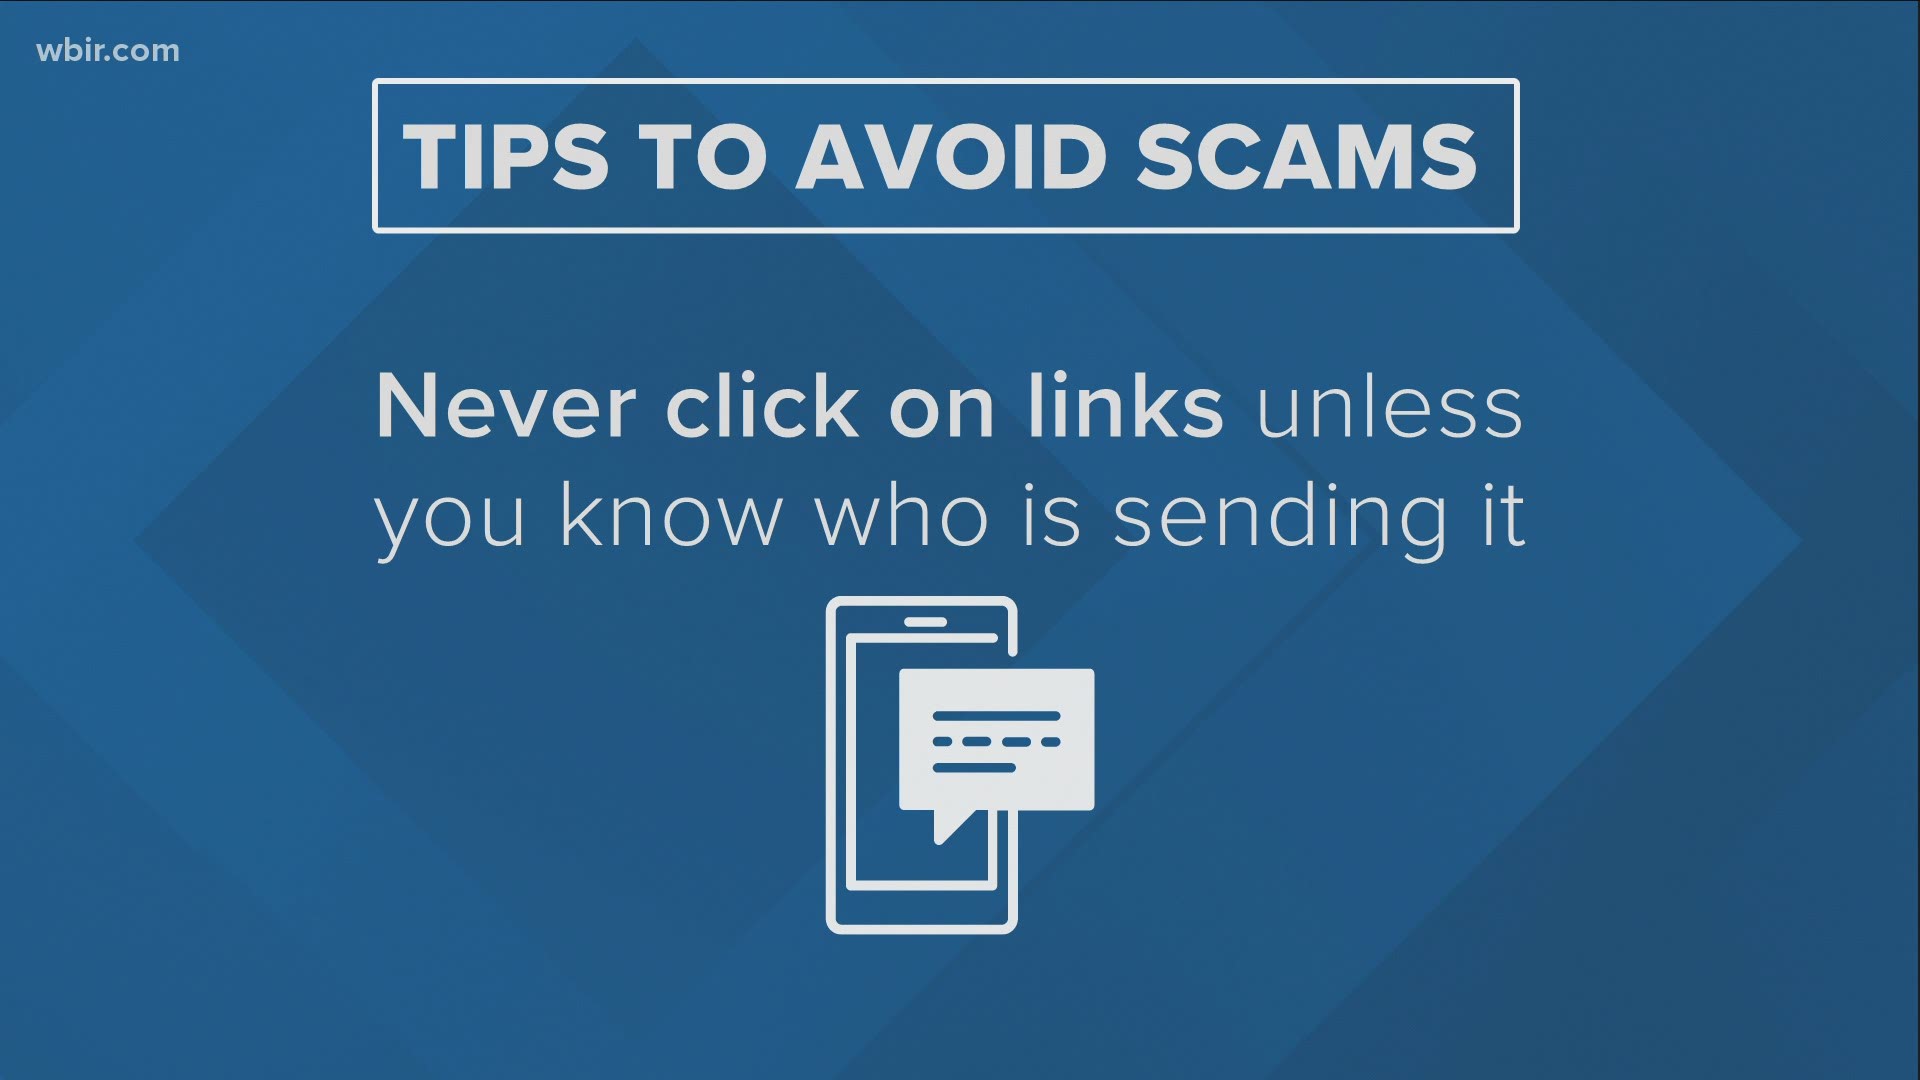 There are many scams out there and thieves tend to keep up with consumer trends, making them harder to identify. Here are some tips for staying safe.